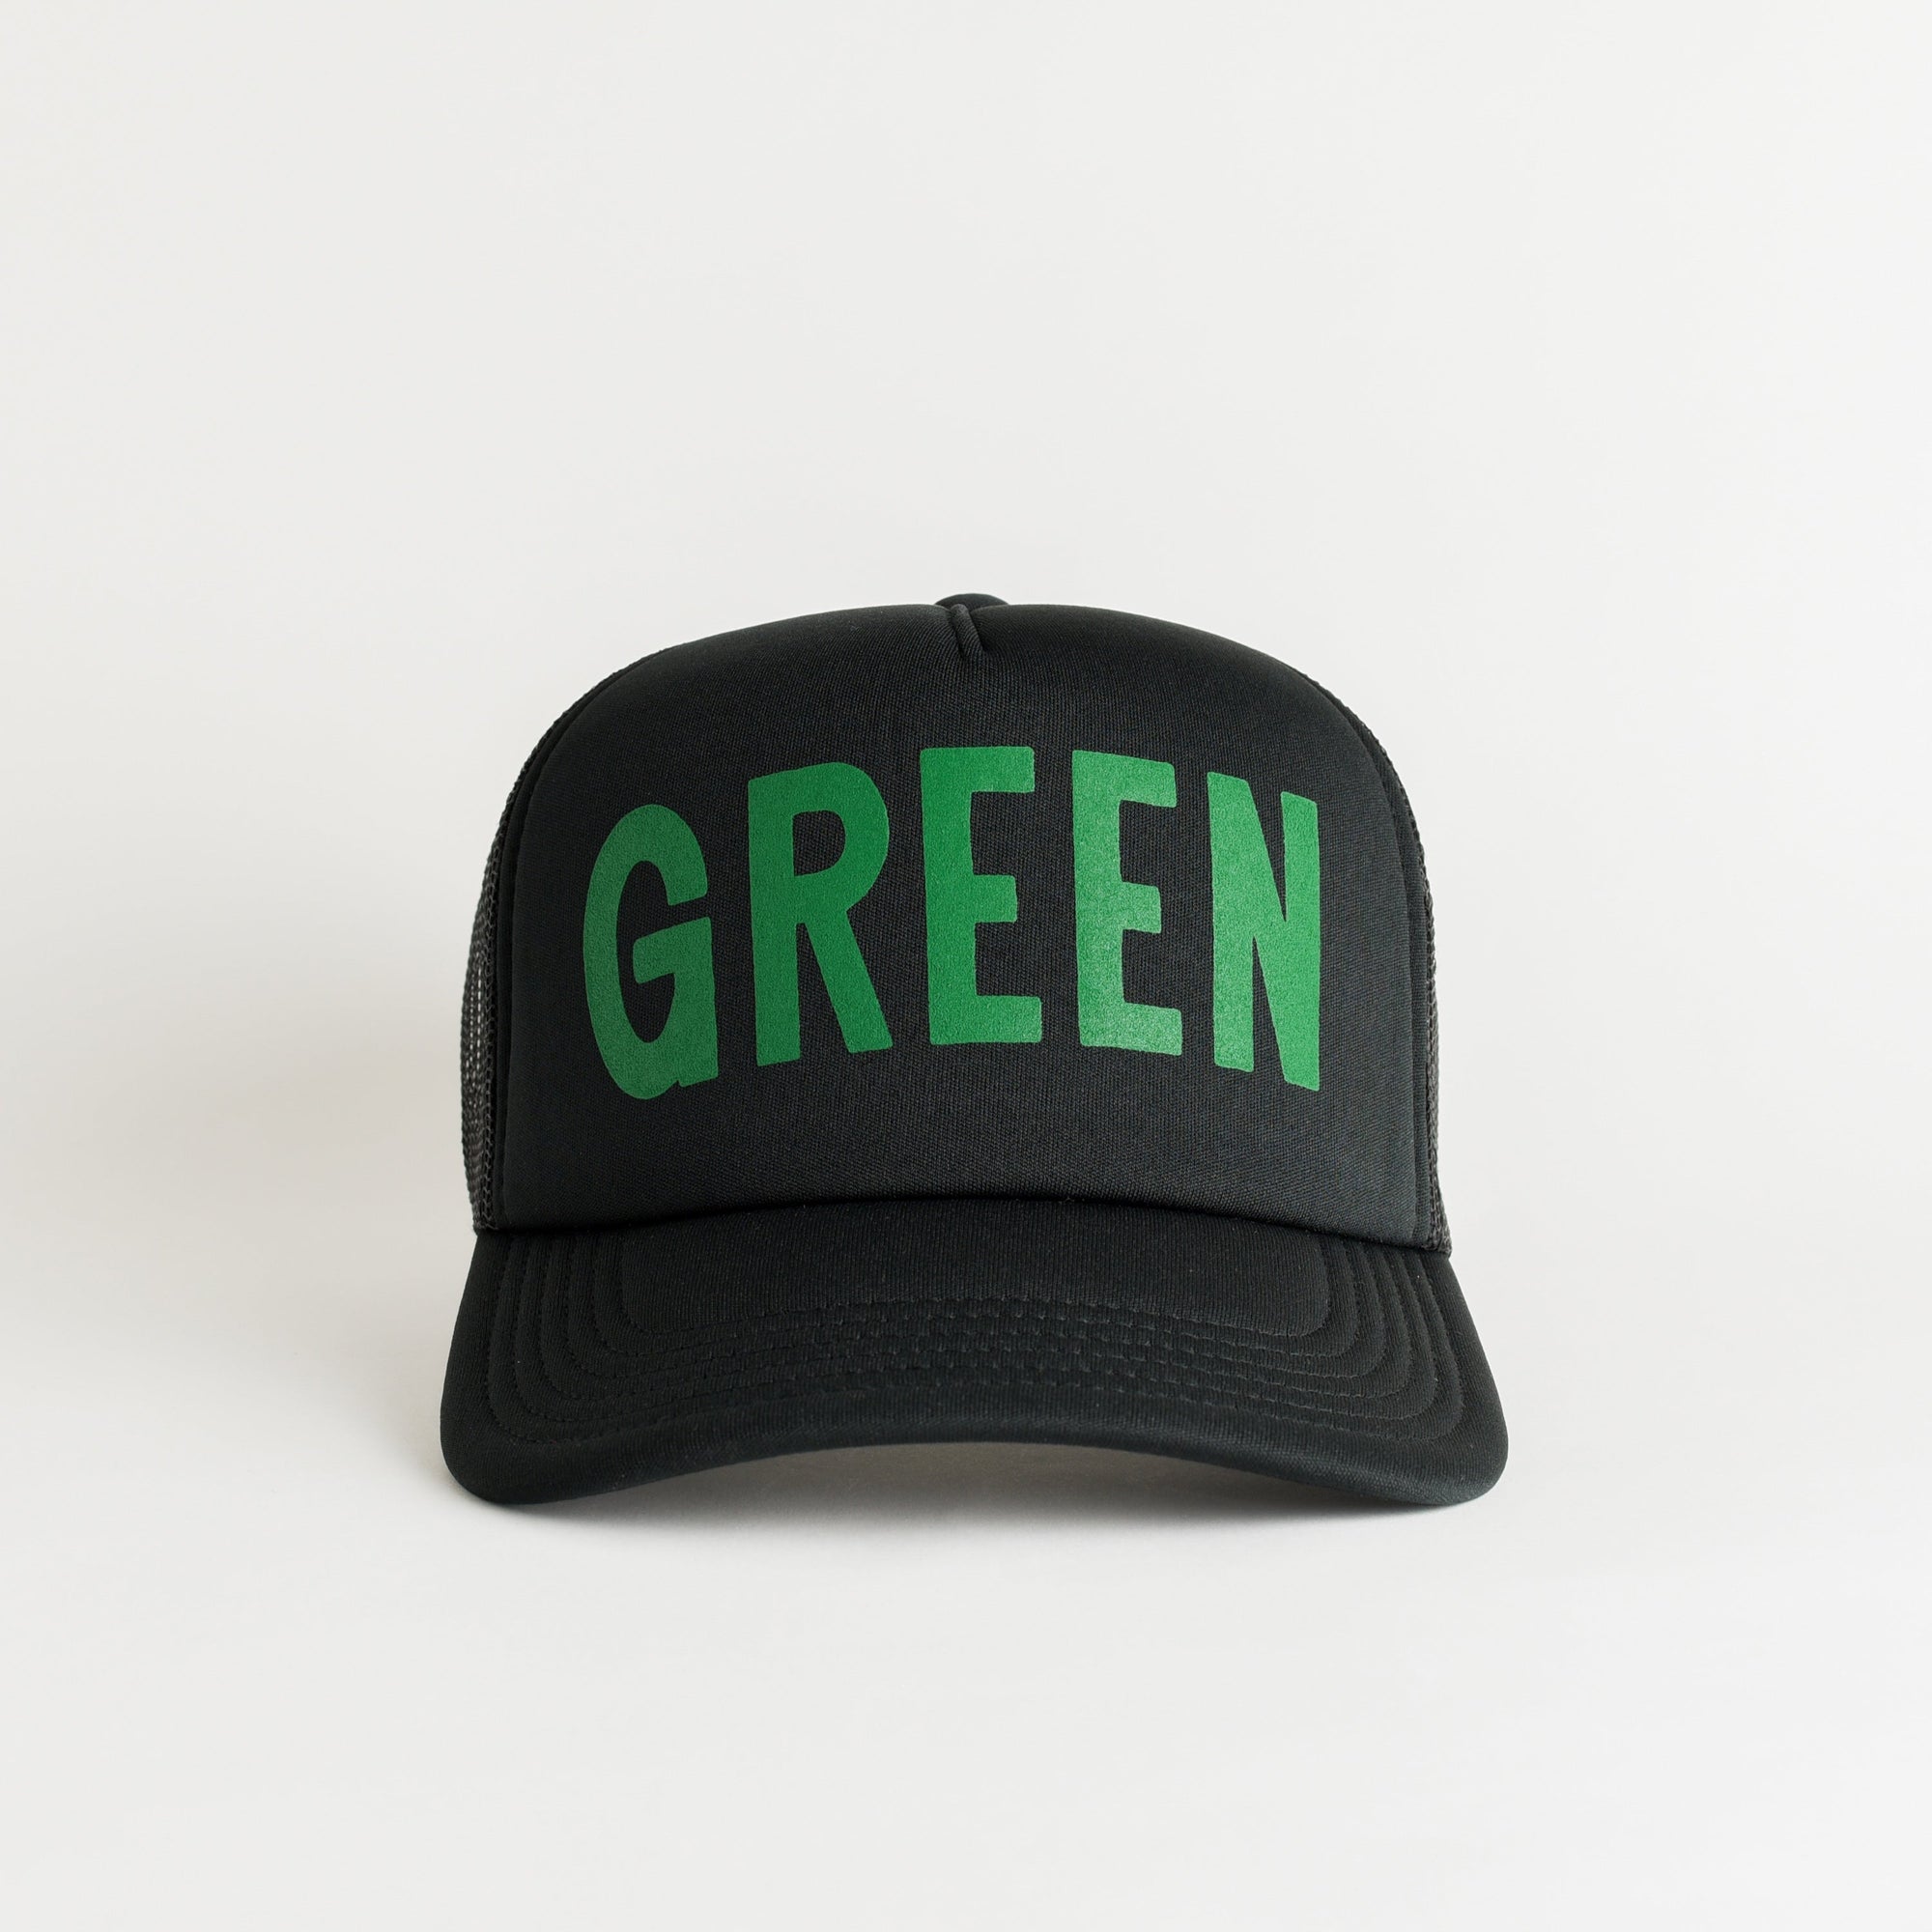 St. Patrick's Day Green Recycled Trucker Hat - black